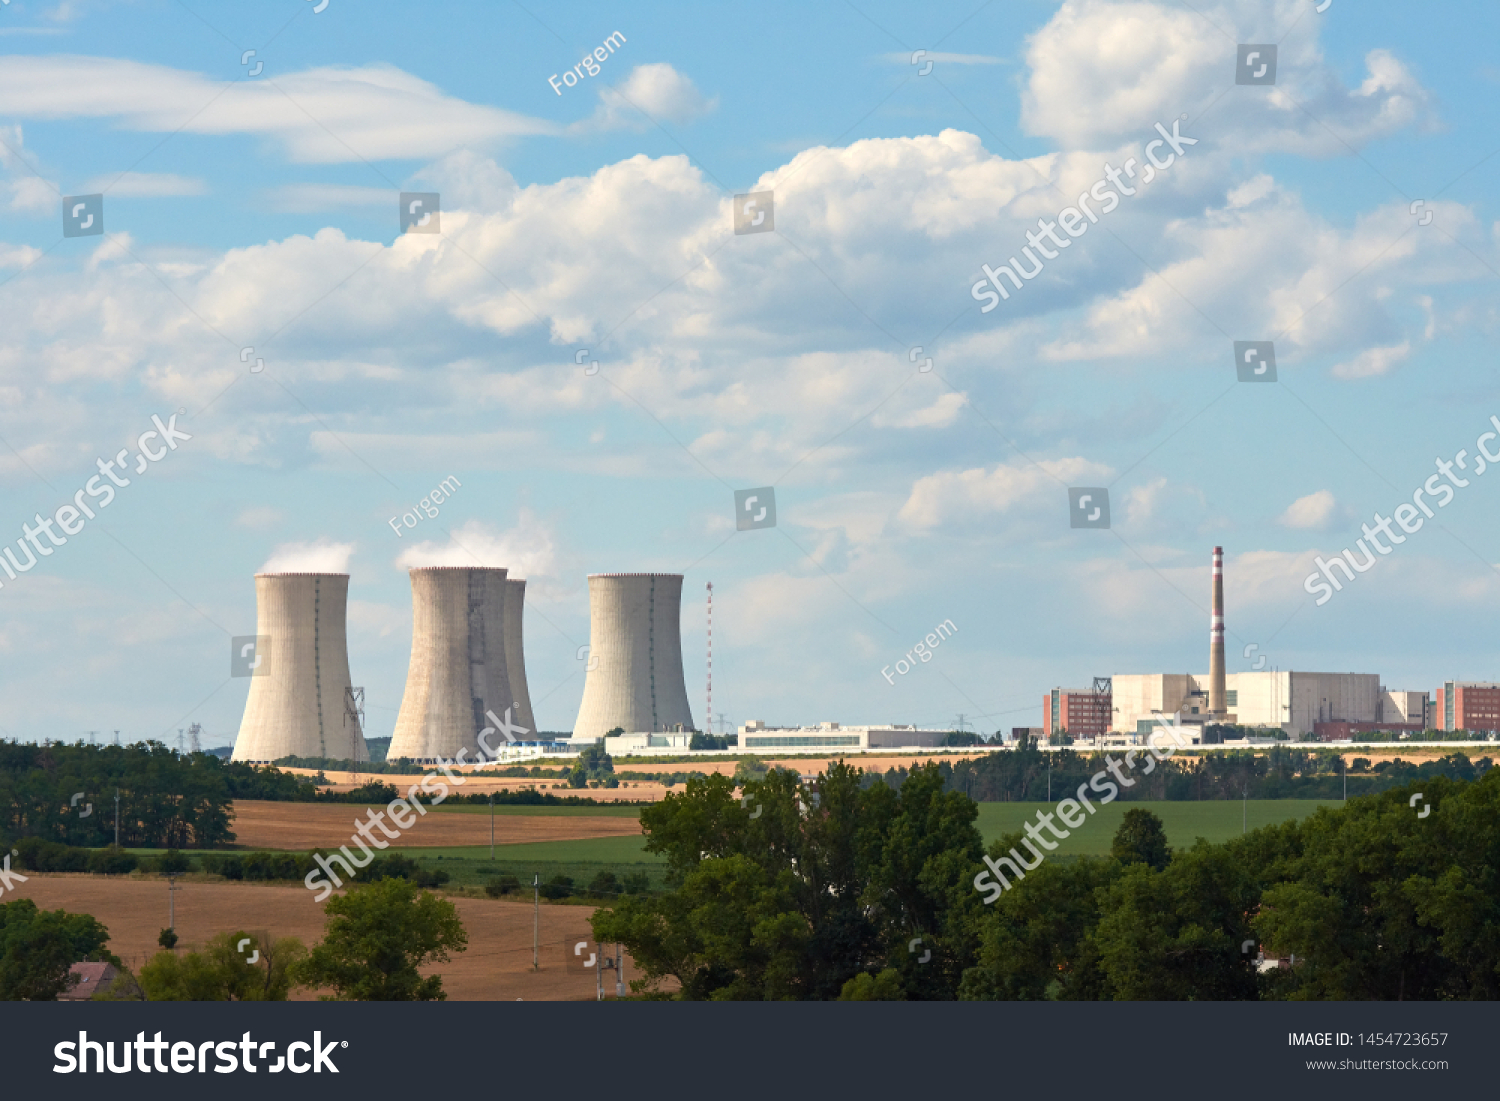 View of smoking chimneys of nuclear power plant, power lines and forest, under blue sky with white clouds #1454723657